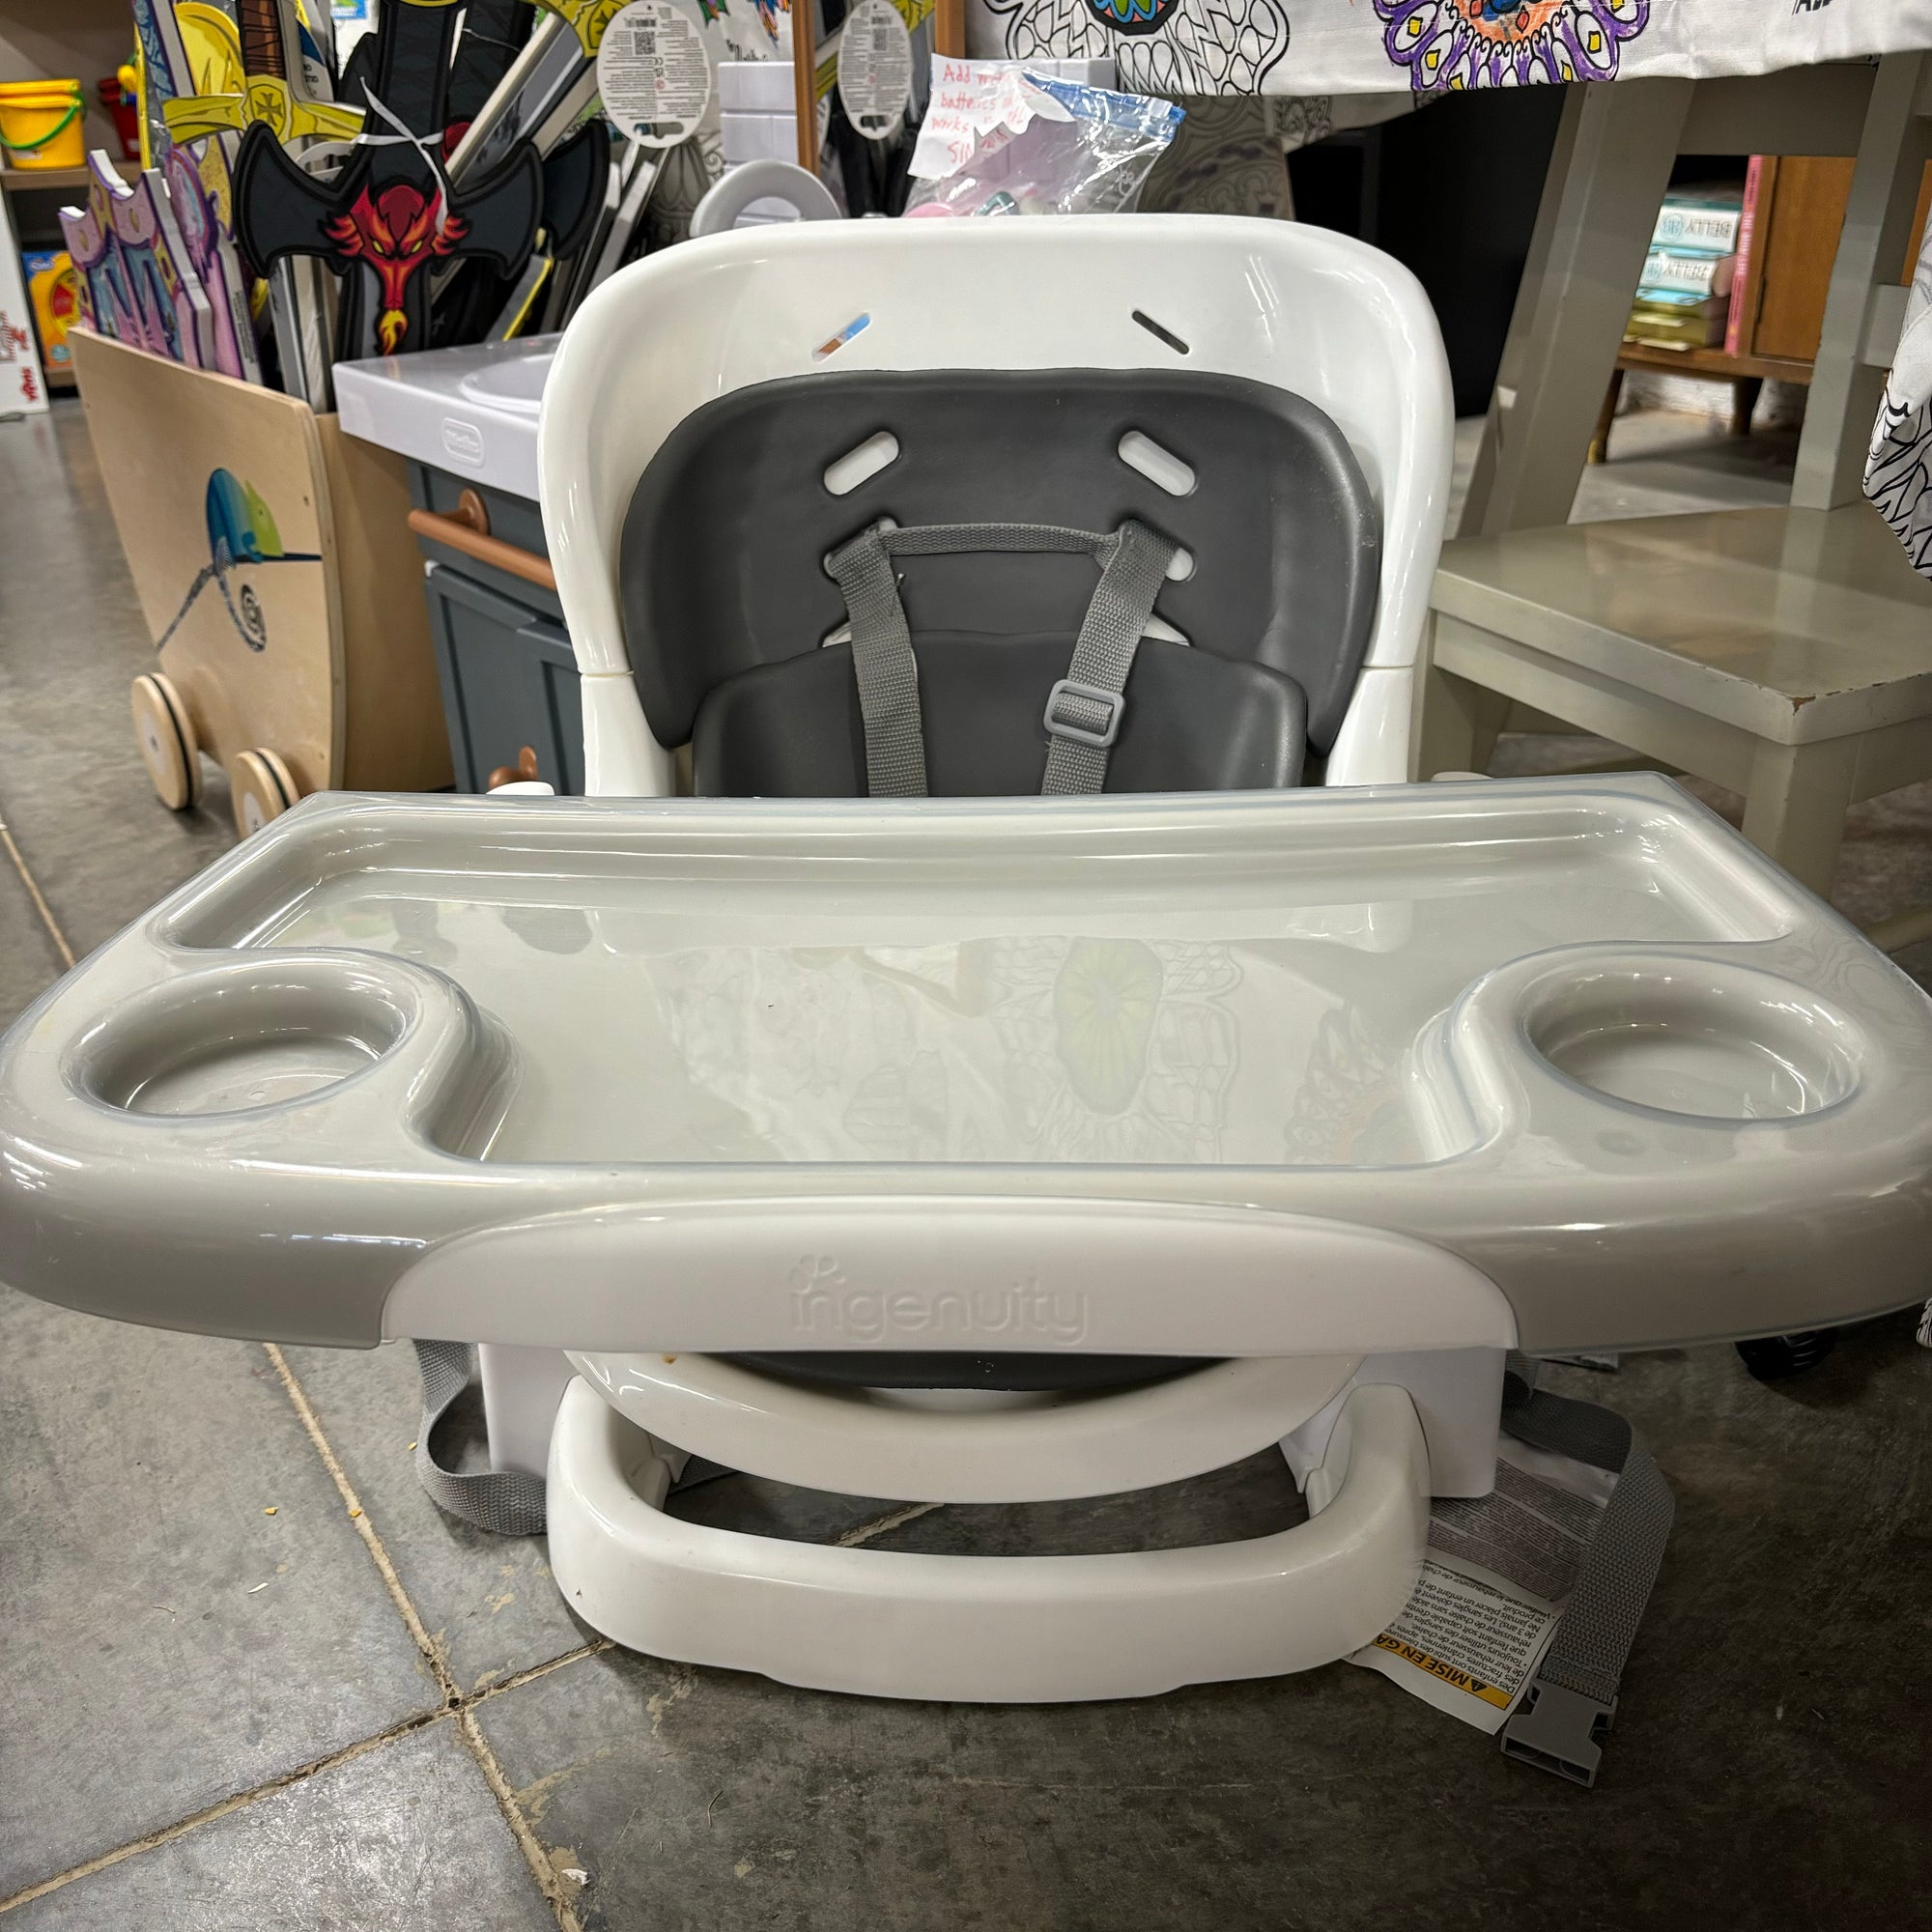 Resale Ingenuity Smartclean Chairmate Toddler Booster Seat - local pick up only!